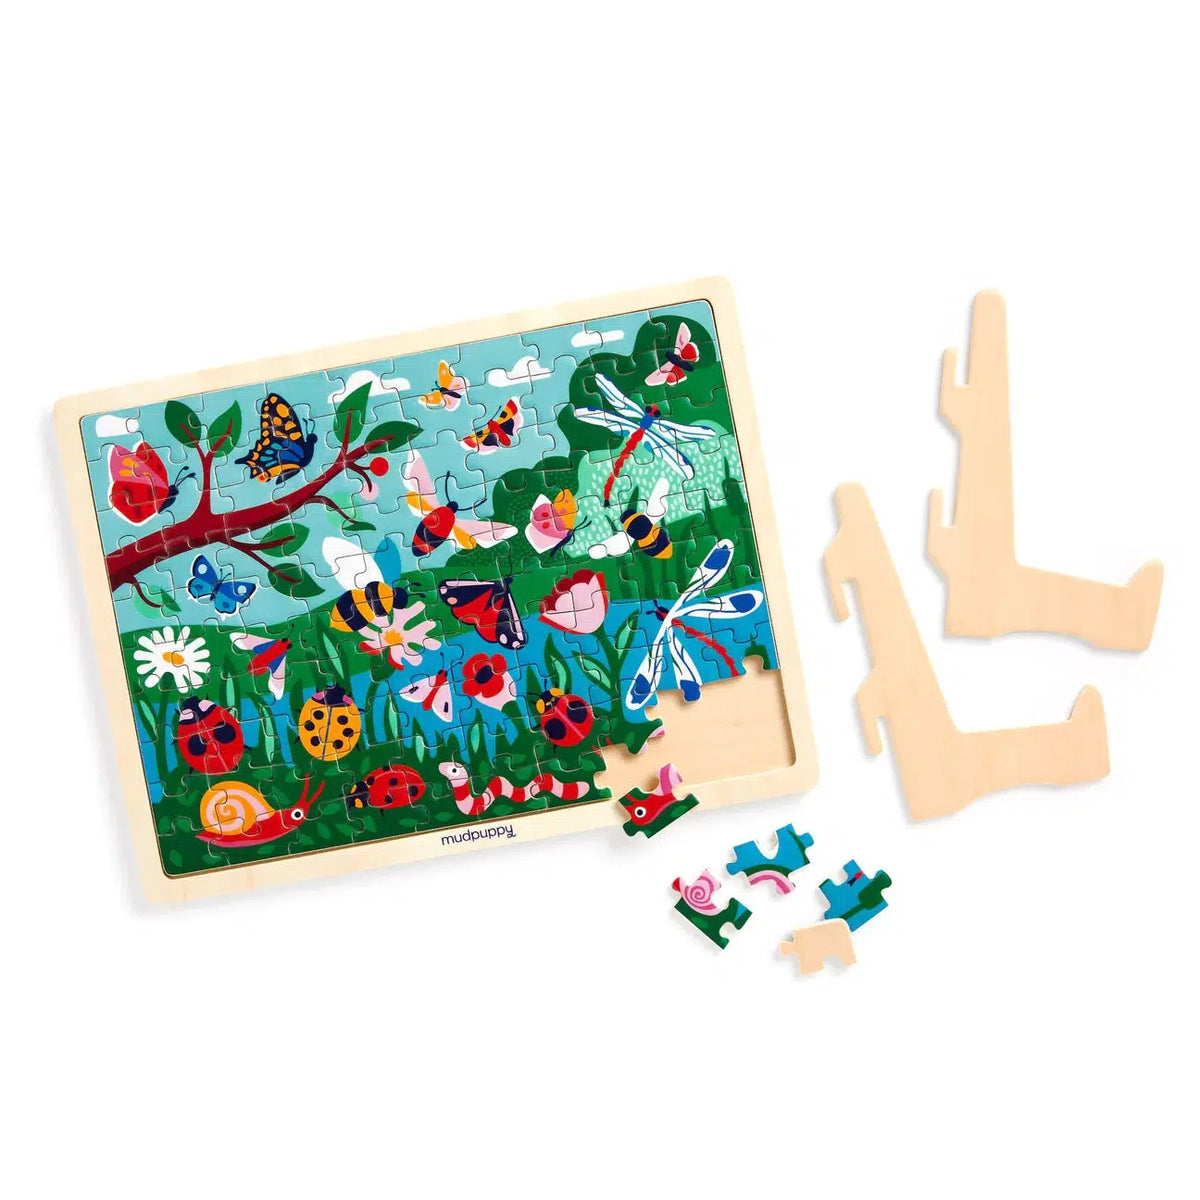 Front view of a mostly completed garden life puzzle, the missing pieces are scattered below the puzzle. To the right of the puzzle is the disassembled display stand.